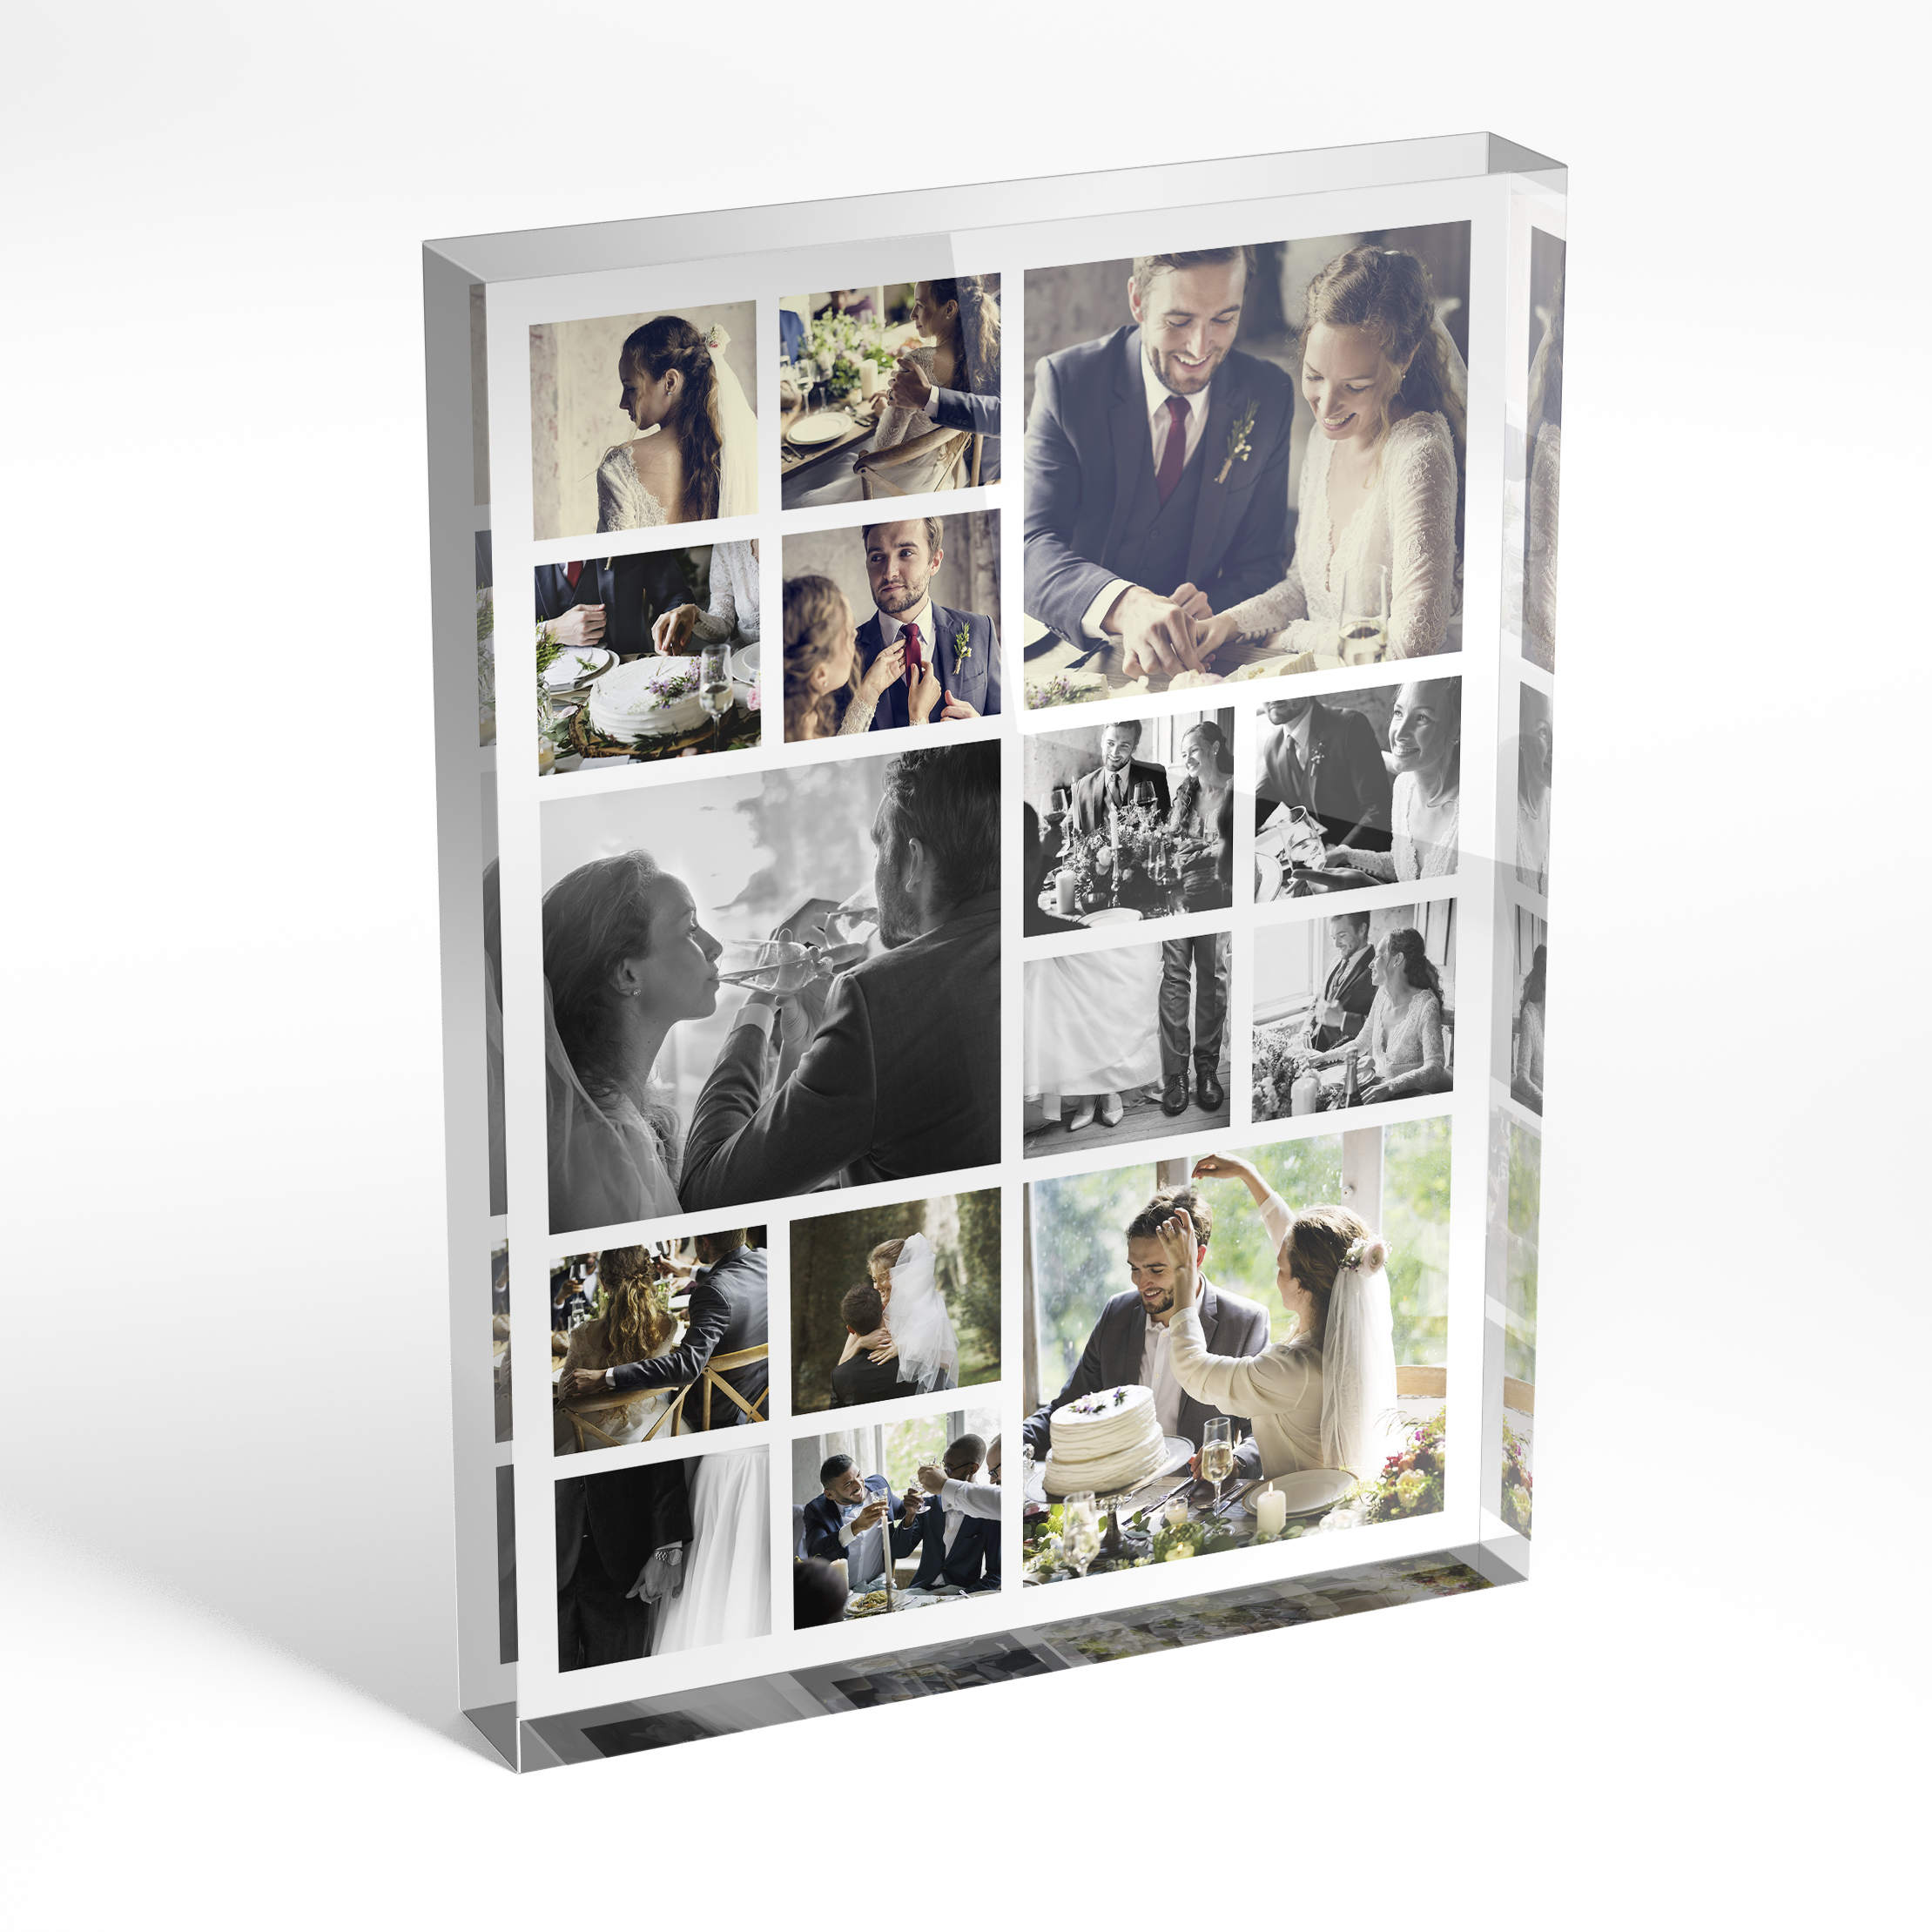 An angled side view of a portrait layout Online acrylic photo blocks with space for 10+ photos. Thiis design is named "My Montage". 